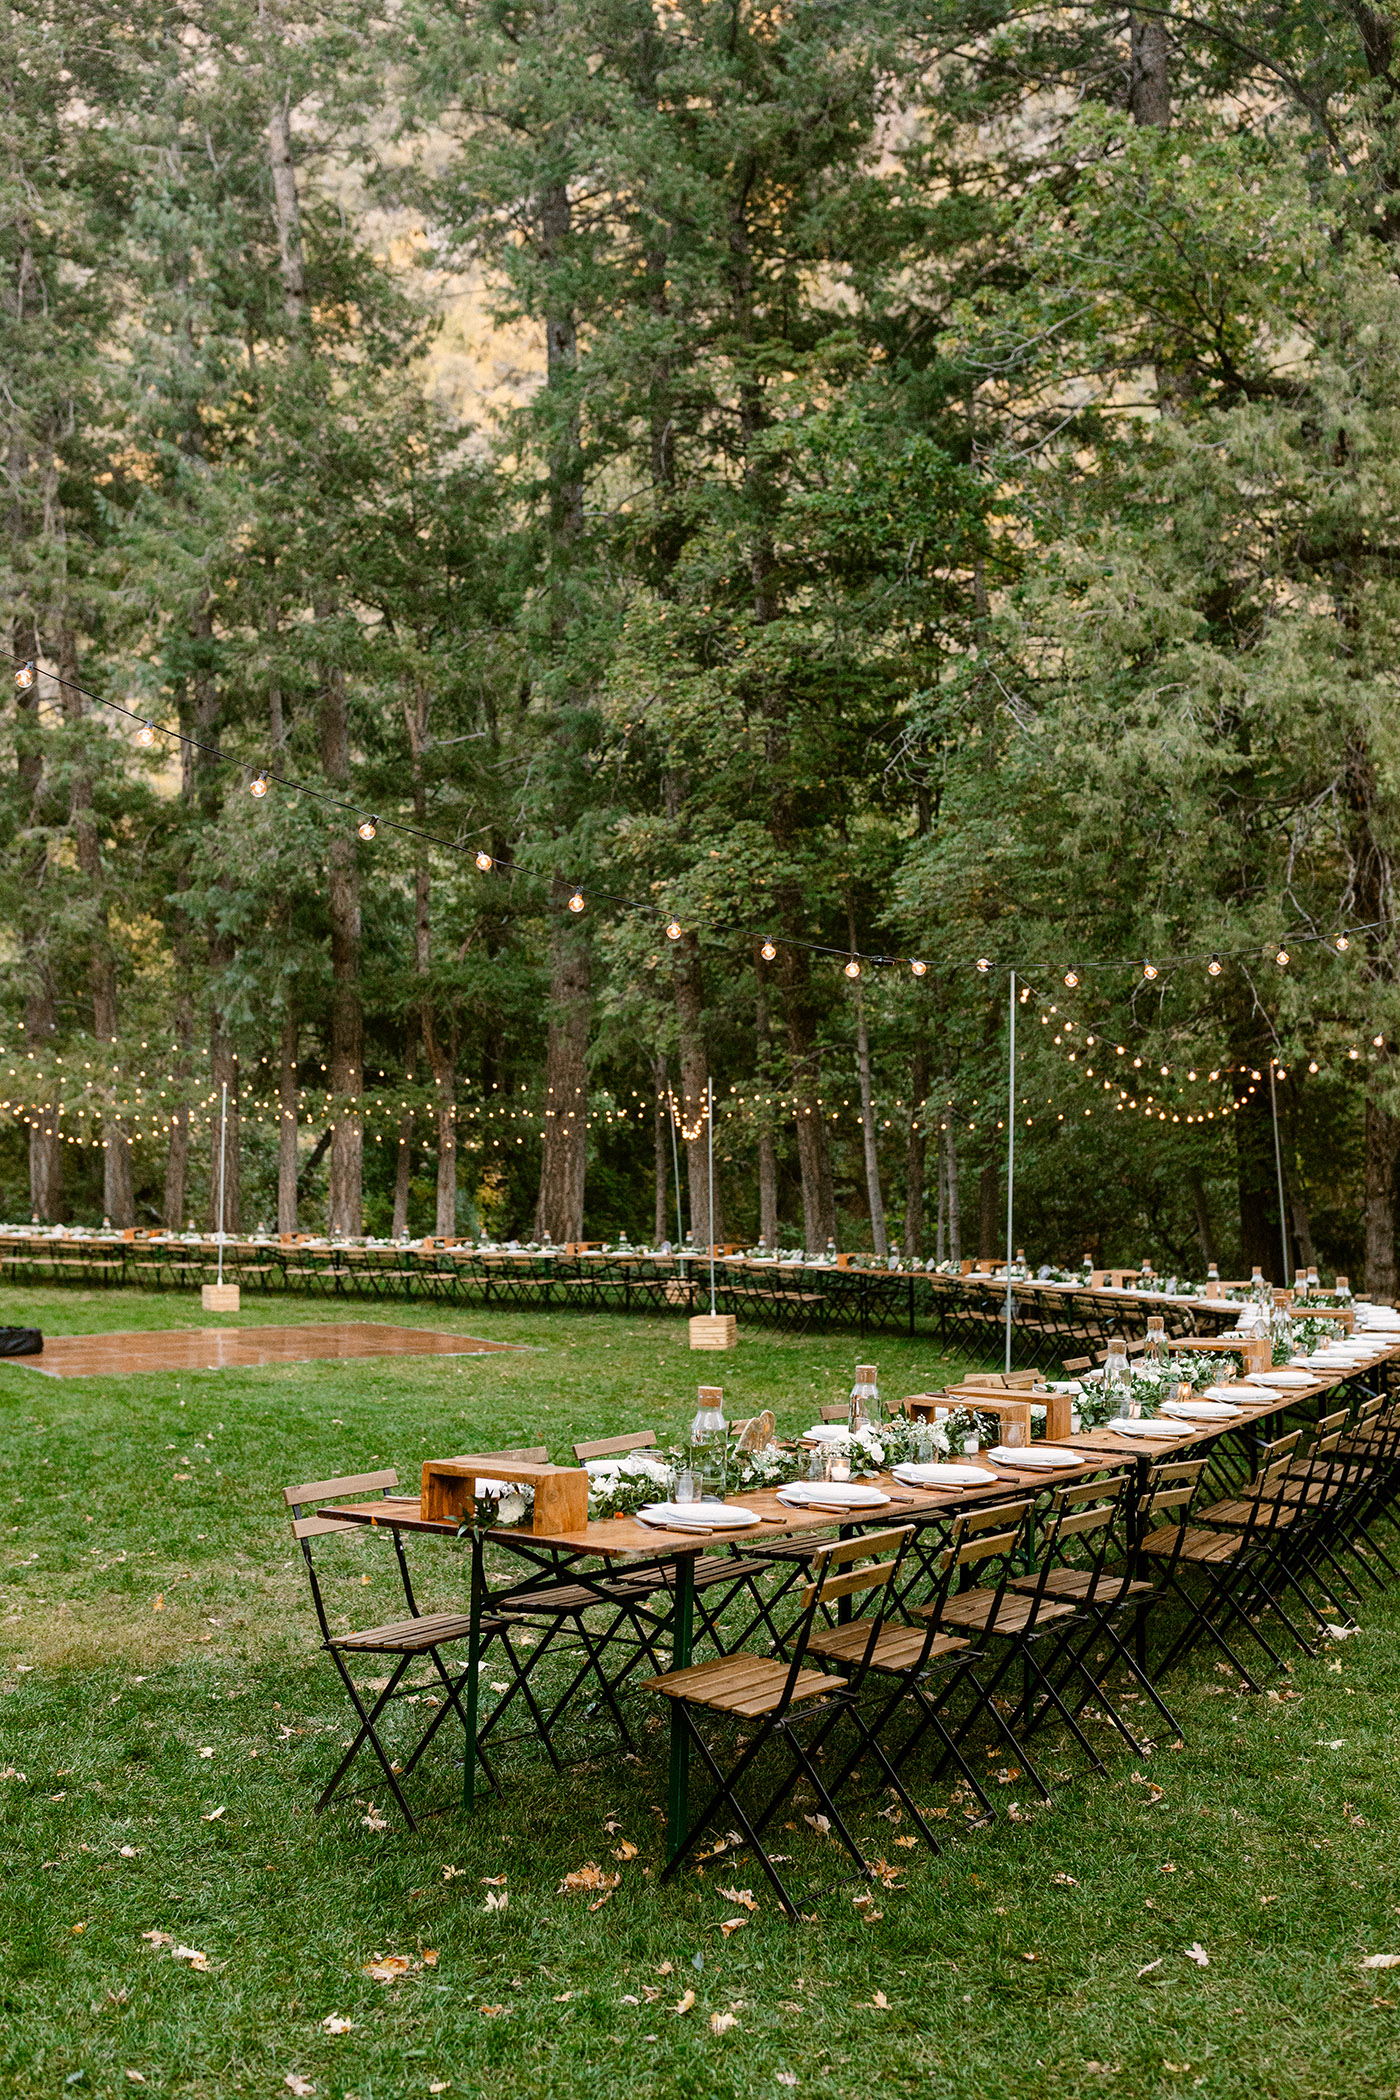 arched reception table for outdoor wedding at orchard canyon on oak creek in sedona az